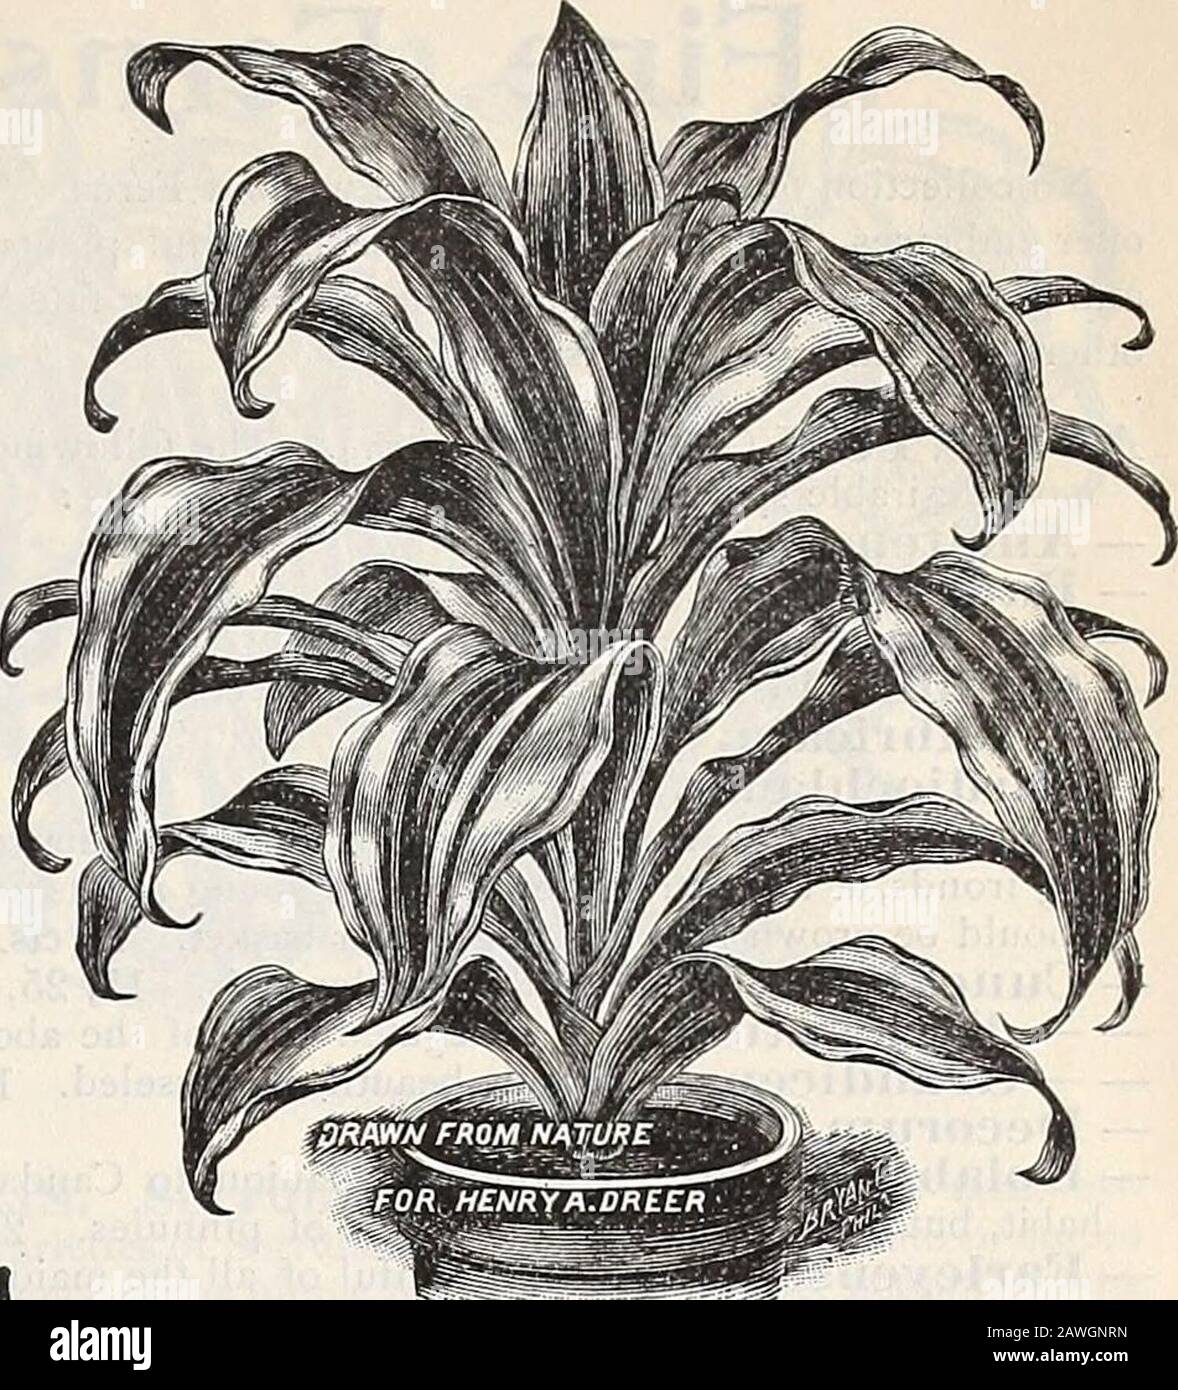 Dreer's autumn catalogue : 1899 bulbs plants, seeds, etc . Dkac.Ena Godseffiana. Drac.«na Lindeni. PANDANUS (Screw Pine). Utilis. This is one of tliemost useful of our ornamentalfoliage plants; excellent forthe centre of vases and bas-kets, or grown as a singlespecimen. Each. 3-in. pots, 8 in. high...$0 25 5 15 ... 1 00 6 18 ... 1 50 Veitclii. This is one of themost attractive of decorativeplants. The leaves are lightgreen, beautifully markedwith broad stripes of purewhite, and gracefully curved. Each.4-in. pots, 12 in. high . .. $1 OO 5 • 15 1 50 6 18 2 00 Stock Photo